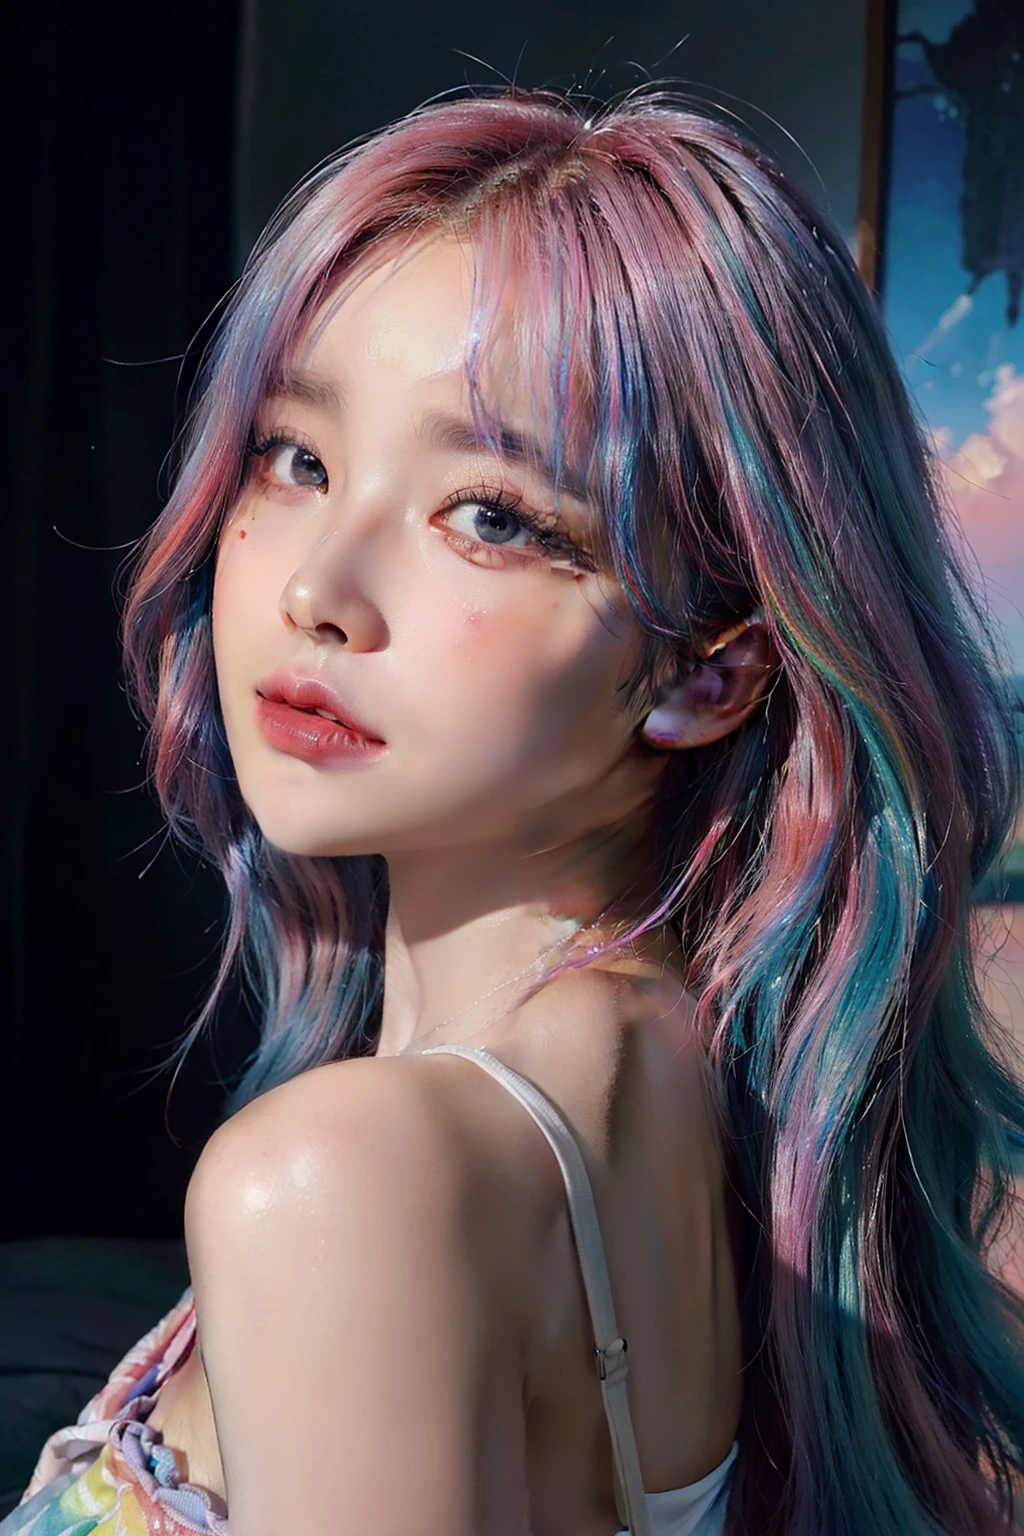 (​masterpiece、top-quality、top-quality、watercolor paiting(Curly)、Official Art、Beautifully Aesthetic:1.2)、(1girl in:1.3)、(Fractal art:1.3)、The upper part of the body、from side、looking at the viewers、patterns、(rainbow-colored hair、colourful hair、Half blue and half pink hair:1.2)、Eau、liquids、​​clouds、colourfull、starrysky、stele、Beautiful skin、Clear skin、young skin、high-level image quality、Exquisite makeup、Plump lips、Fresh lips